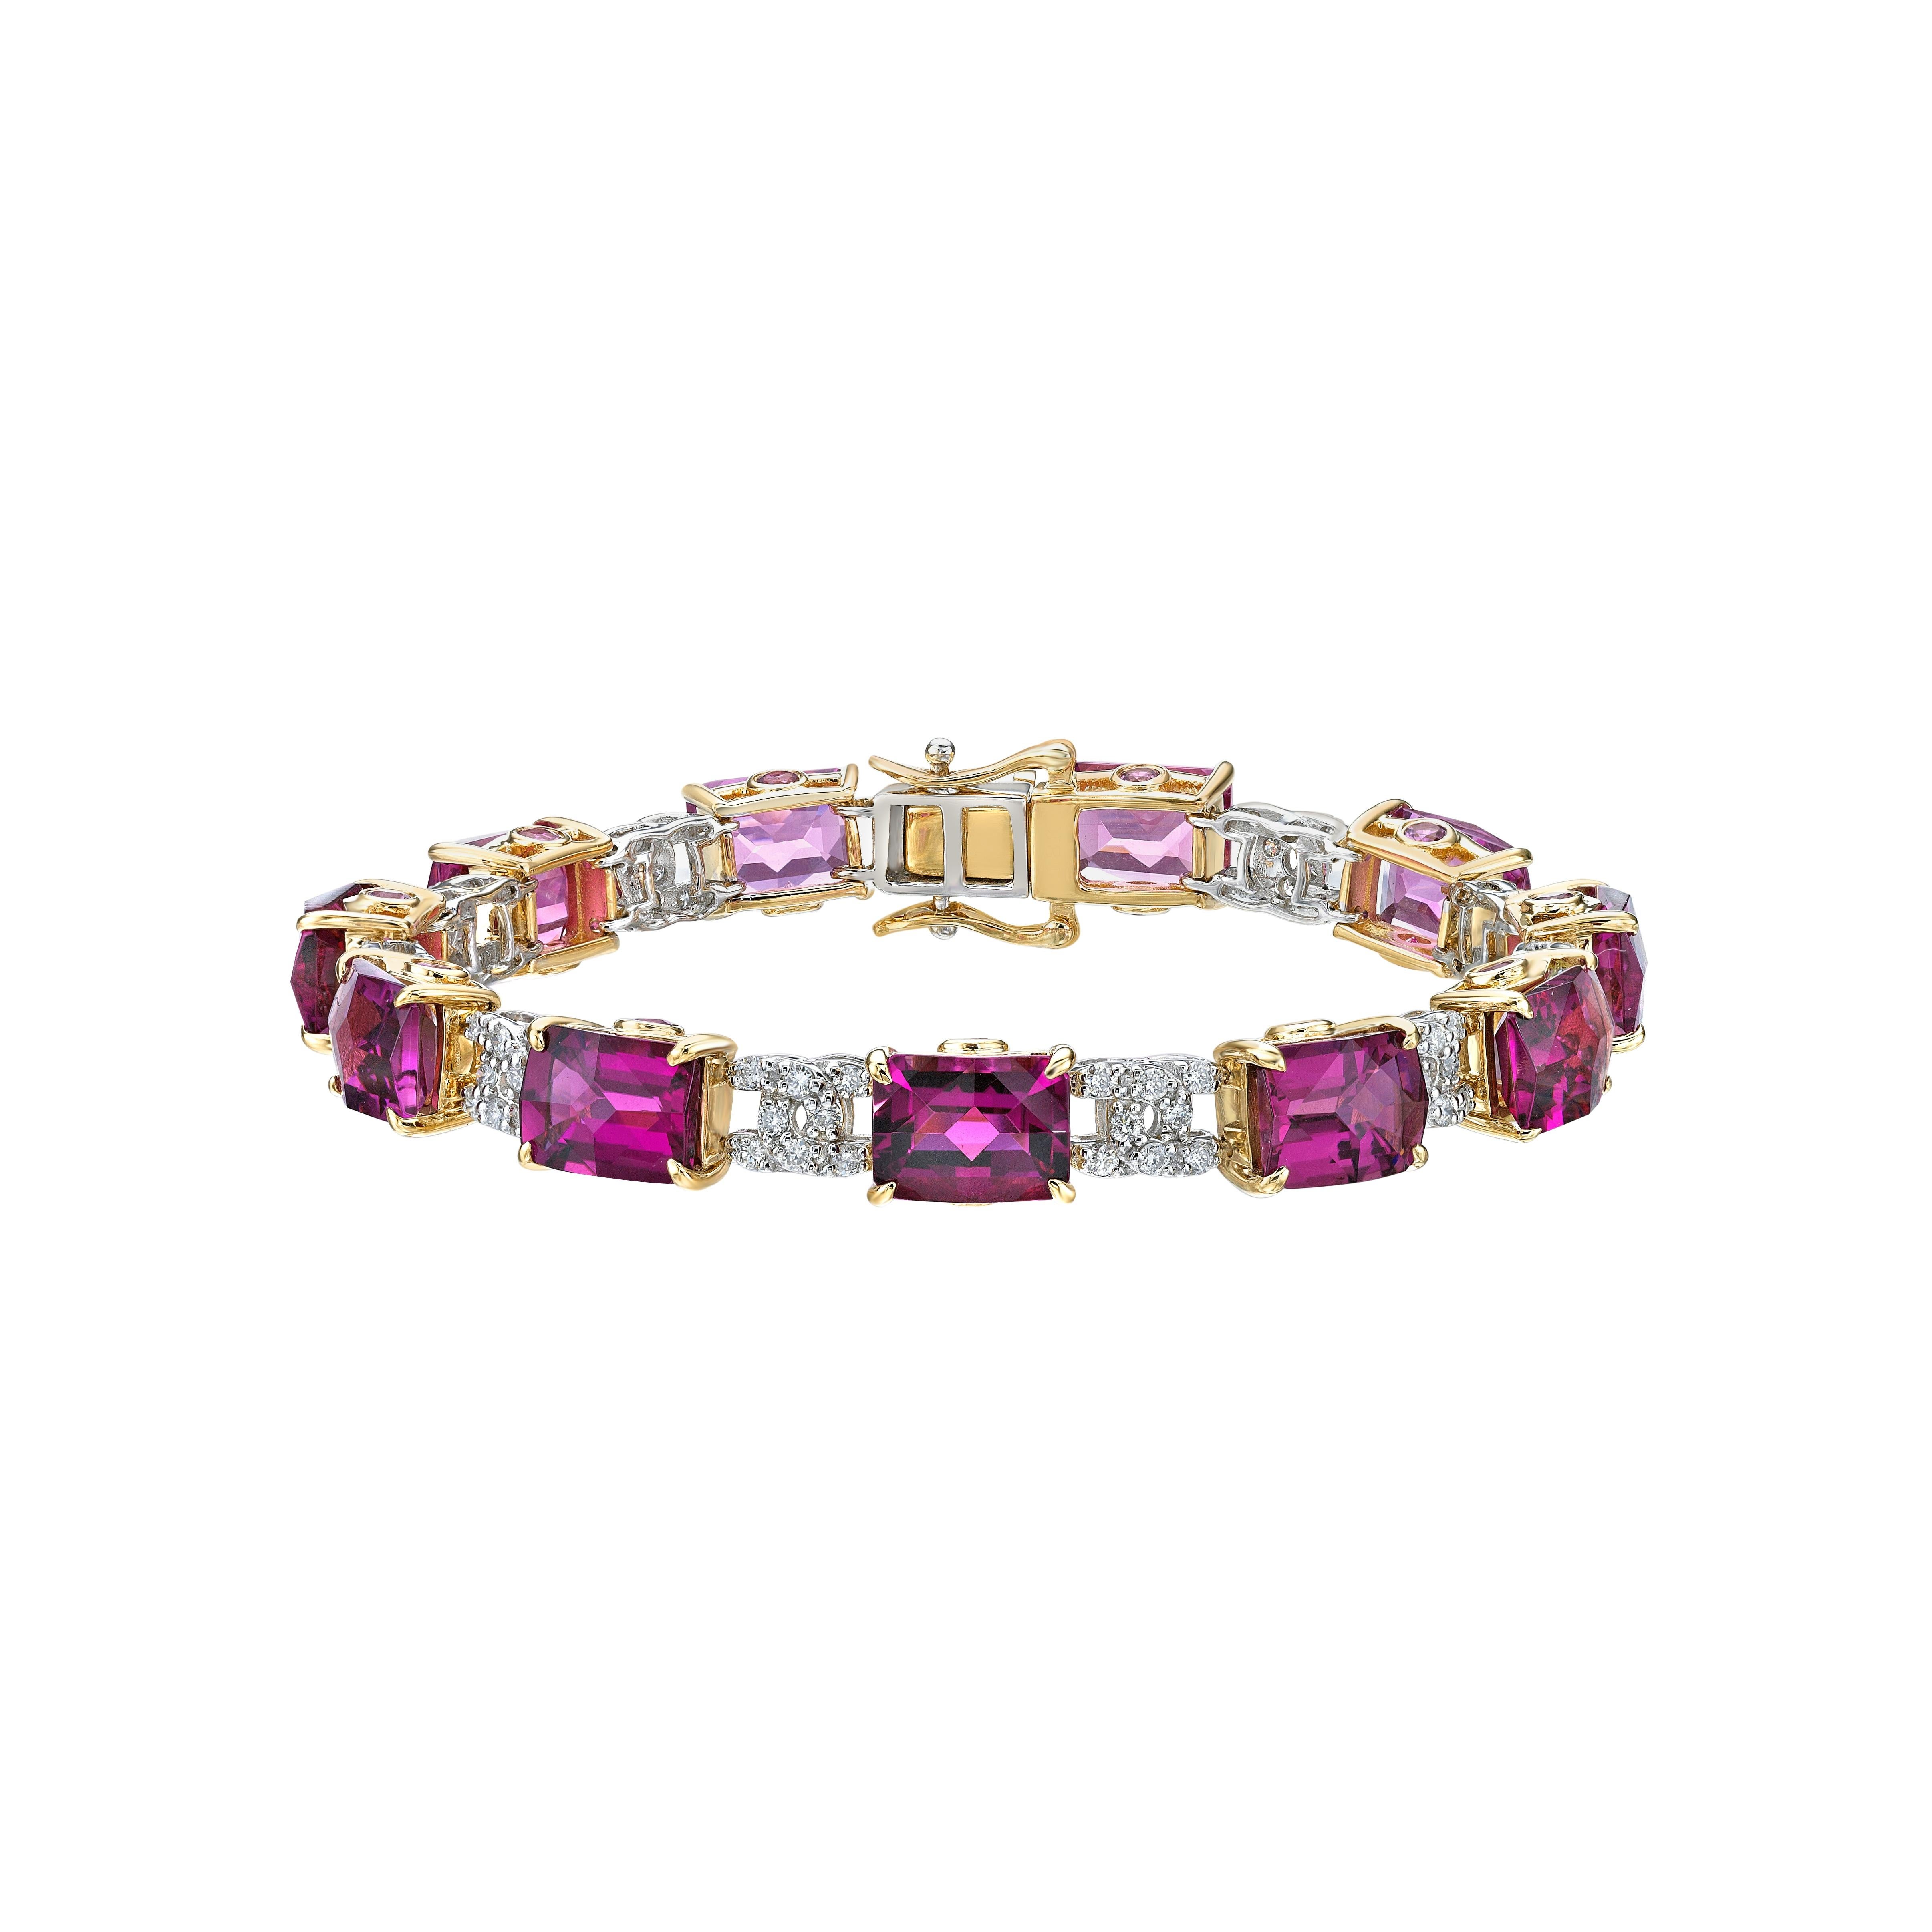 Contemporary Pink Tourmaline Bracelet in 18 Karat Yellow and White Gold with White Diamond For Sale